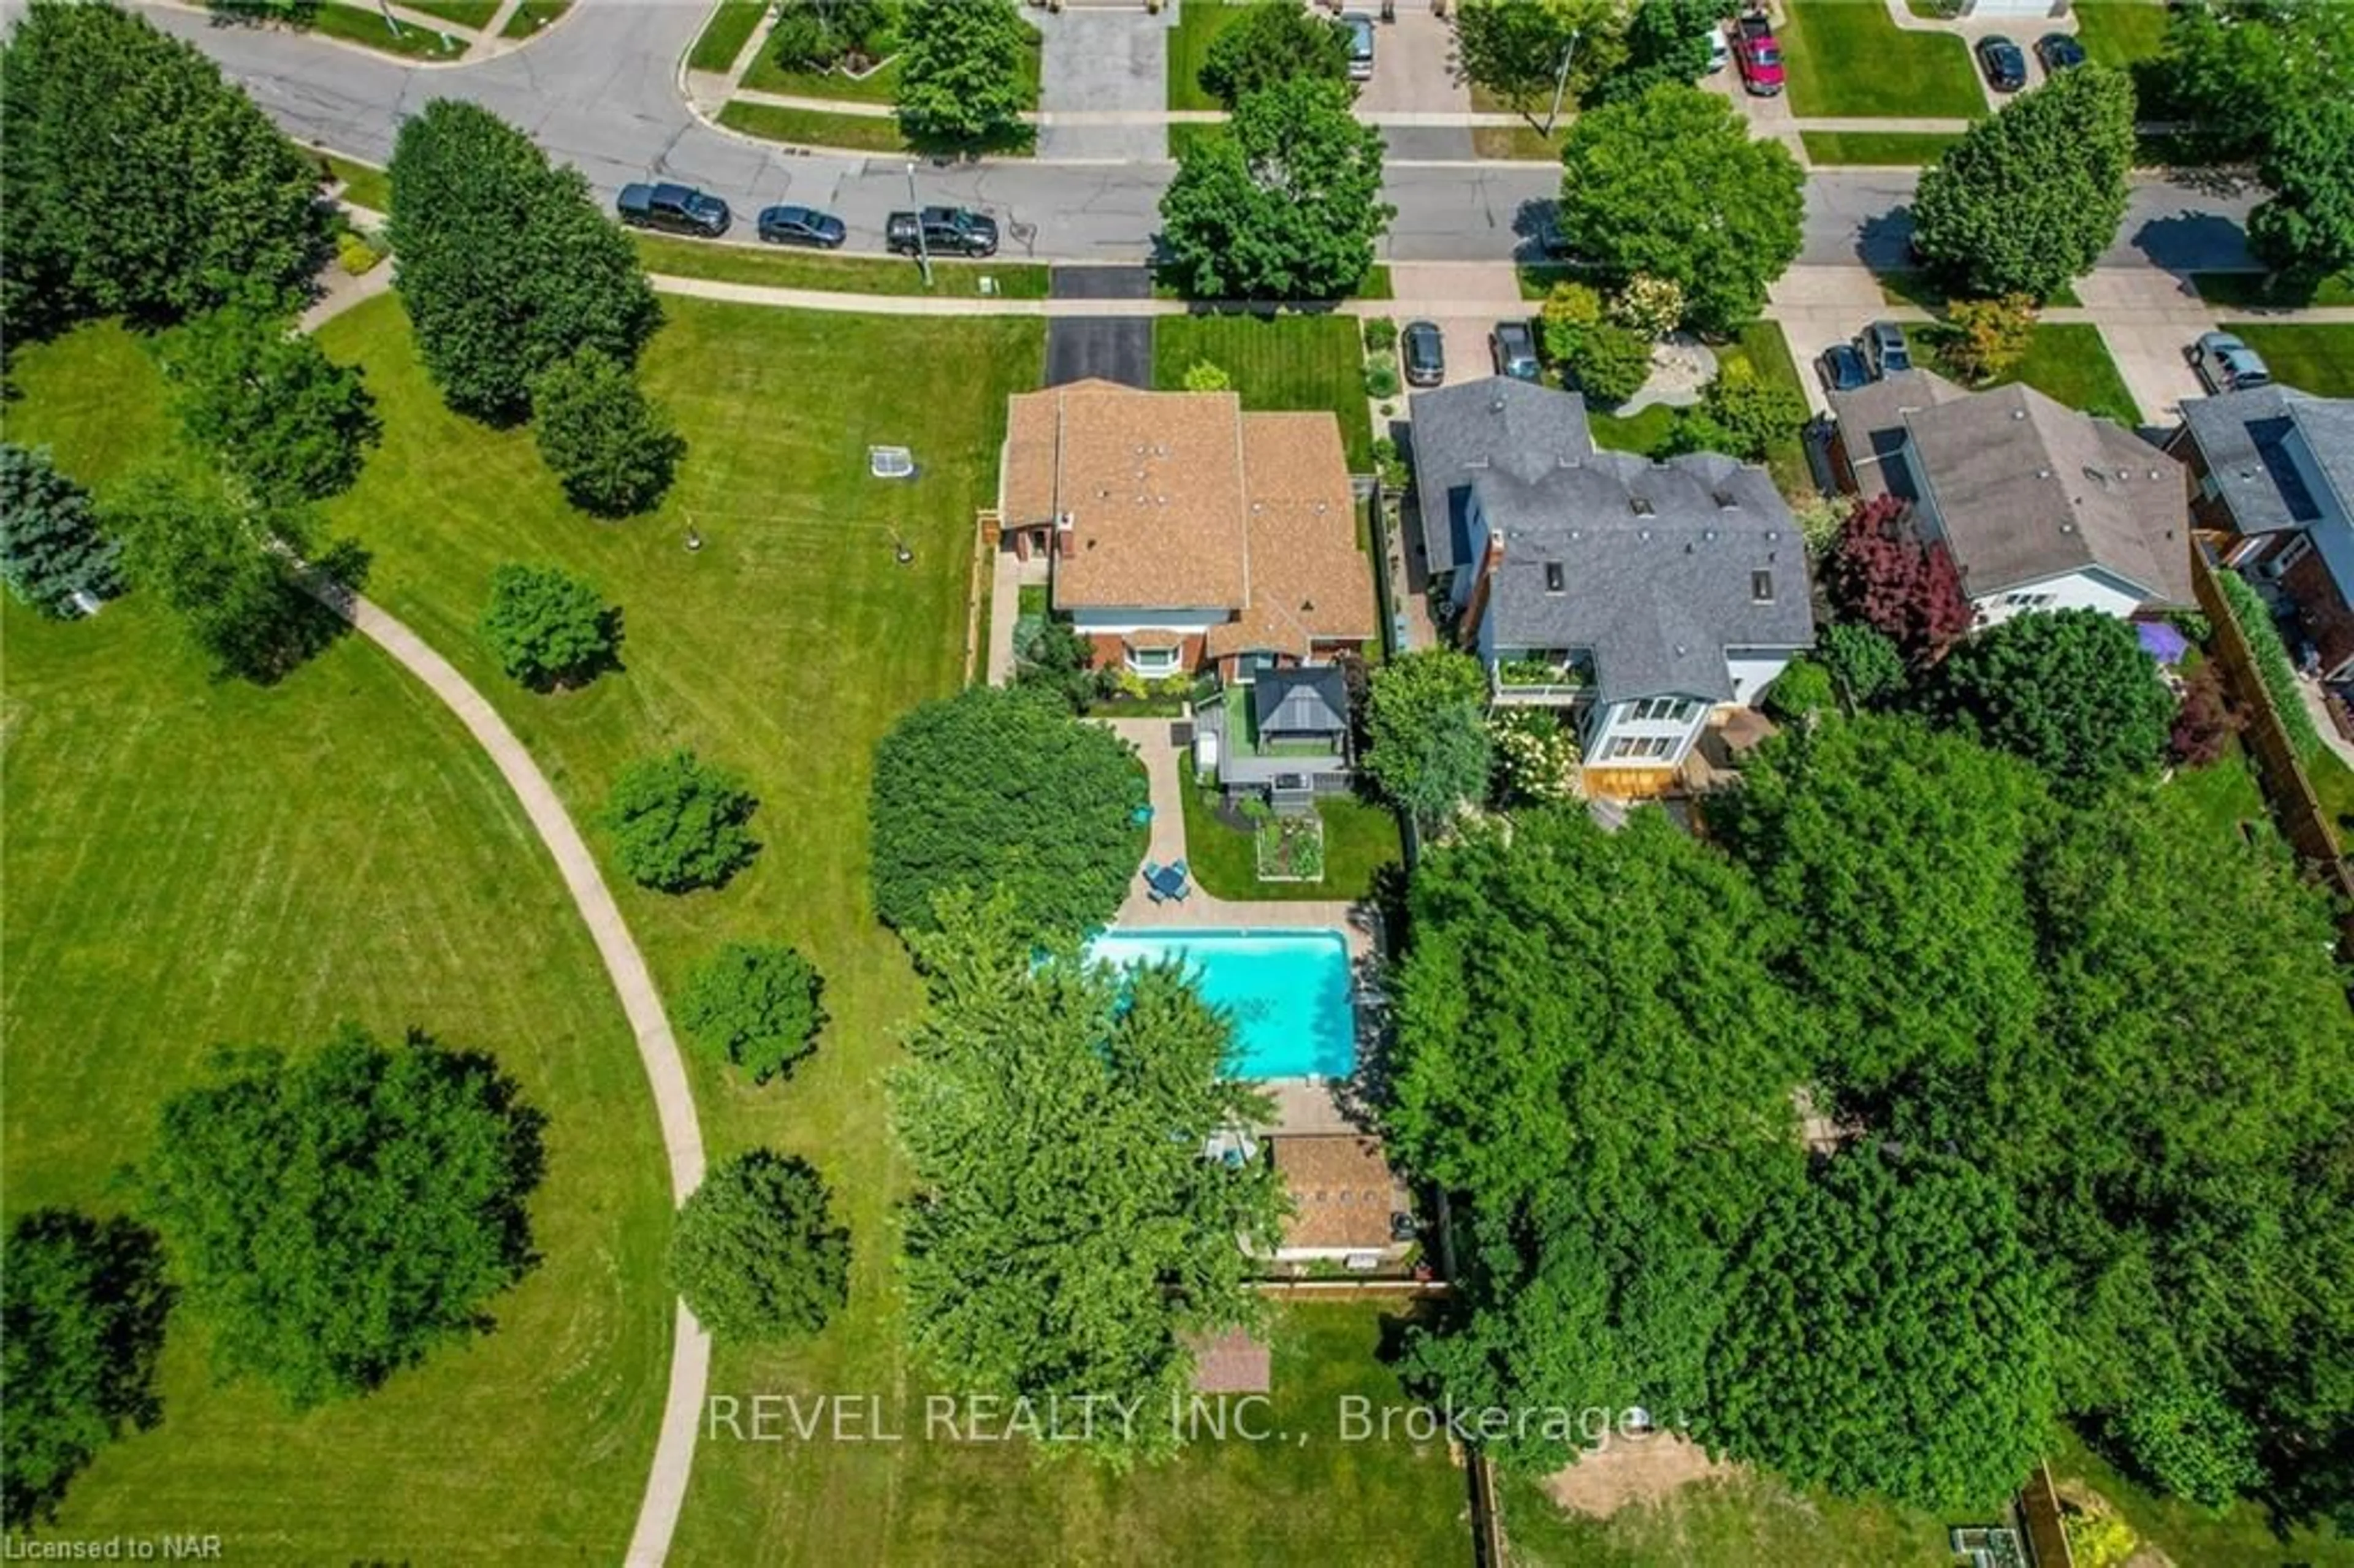 Frontside or backside of a home for 35 Countryside Dr, Welland Ontario L3C 6Z2